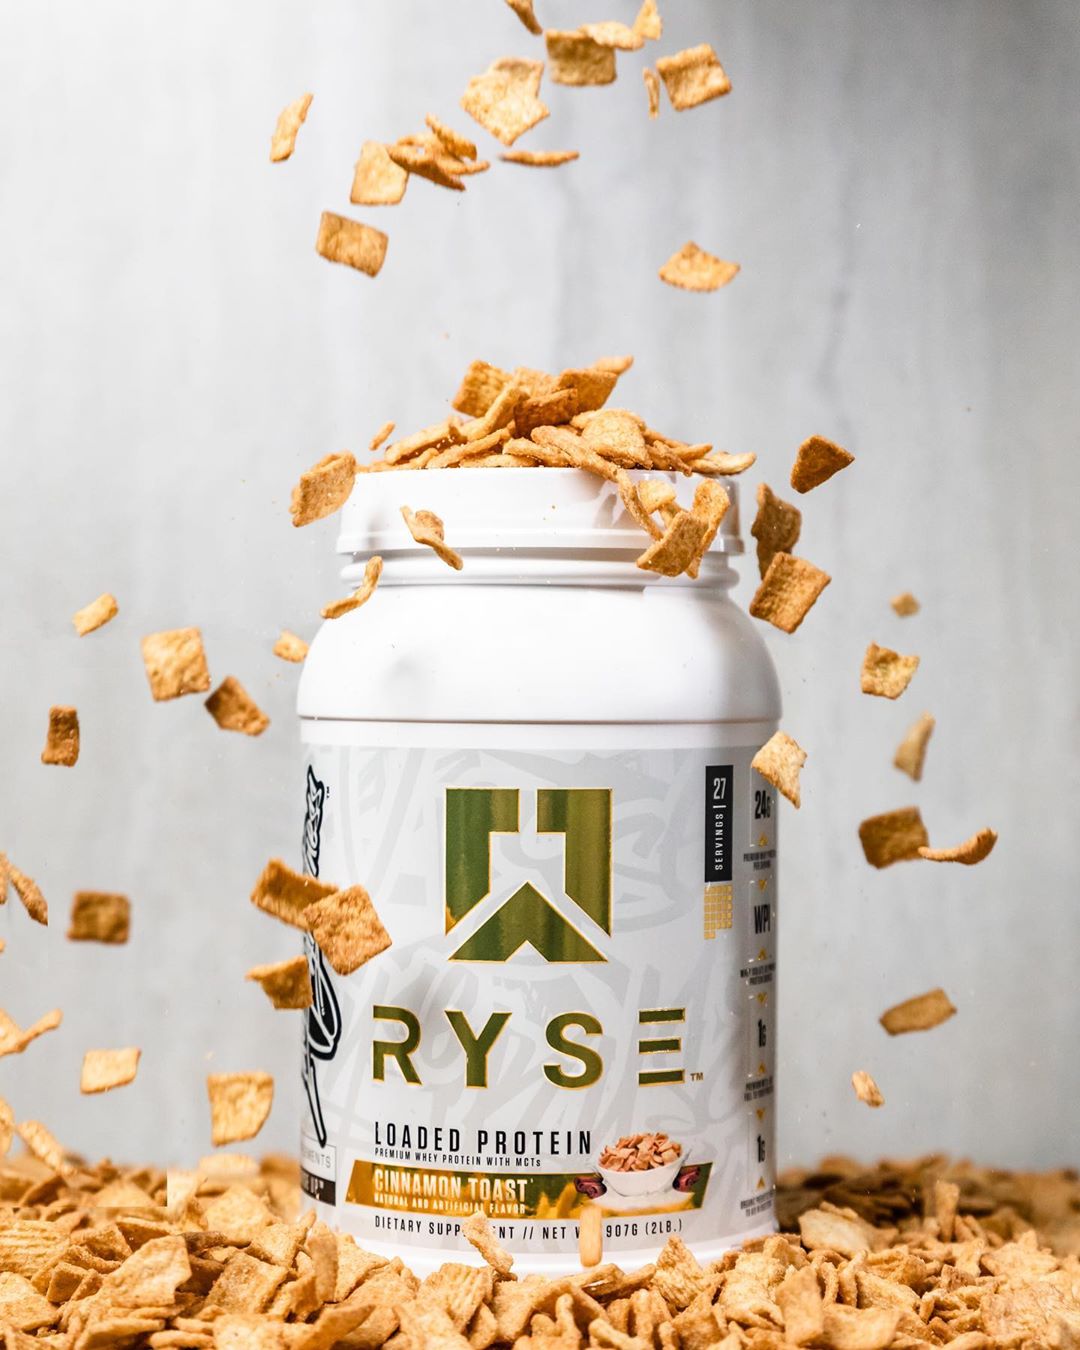 RYSE reveals a limited Gingerbread Cookie Loaded Protein